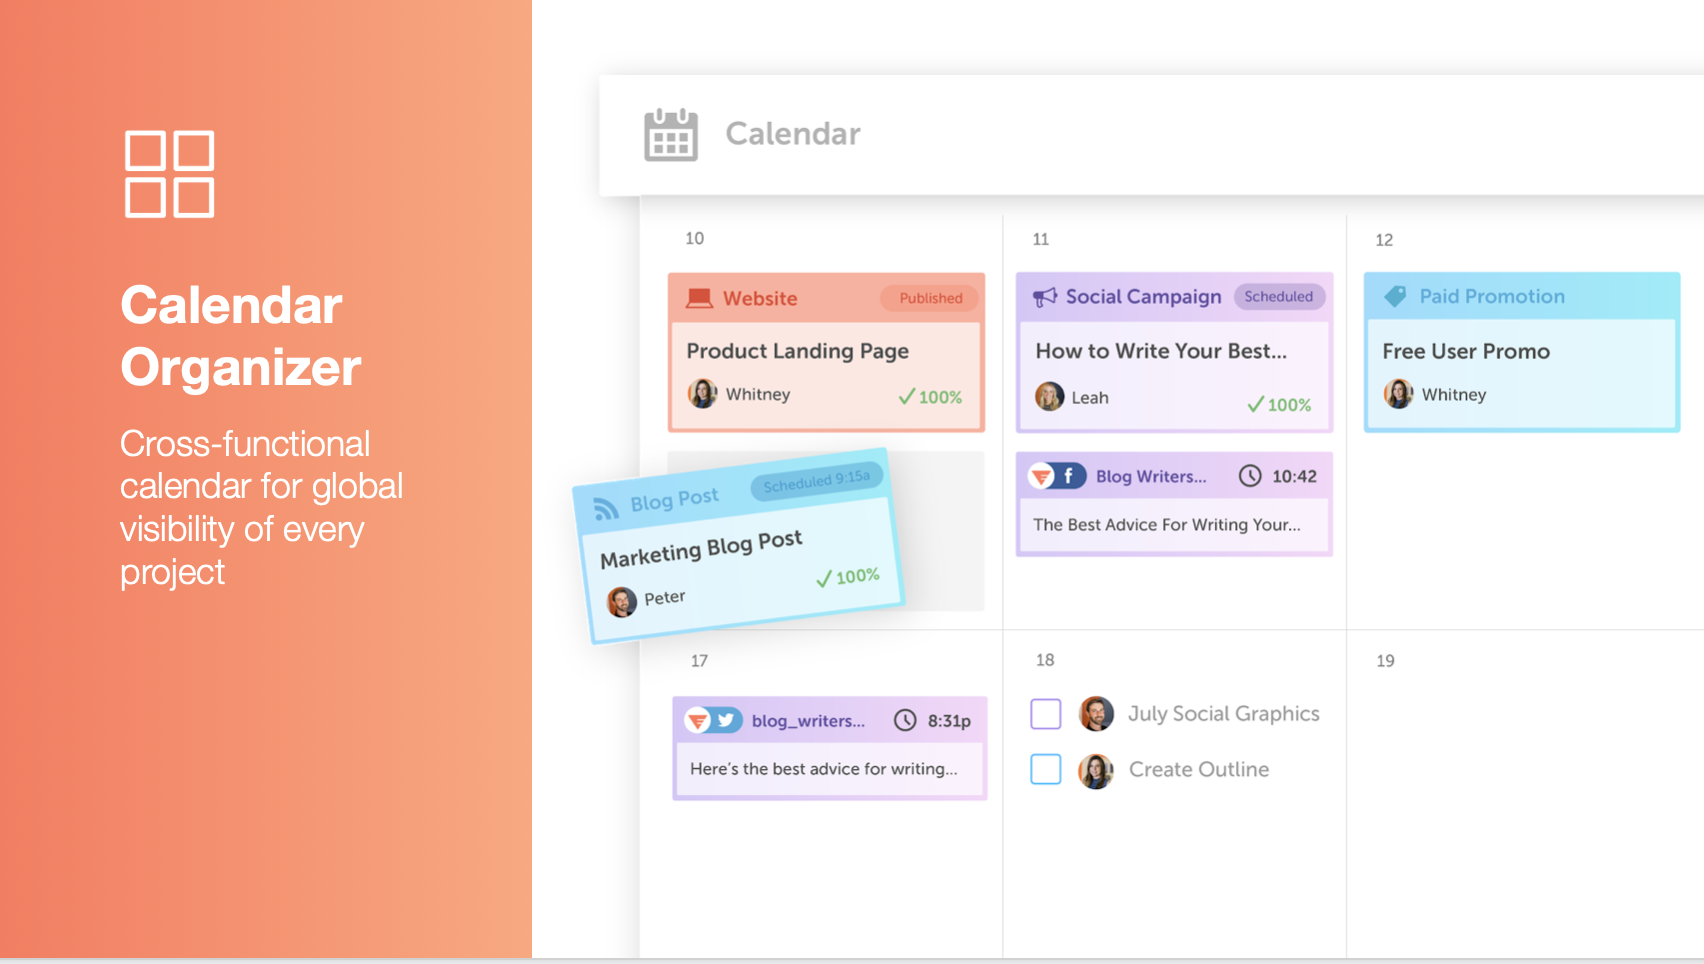 CoSchedule Marketing Suite Software - Visualize your entire marketing strategy in real-time. With Calendar Organizer, you'll see every project & campaign in a single calendar. Plan, create, & publish content from your calendar. Give execs live updates of your work. And more!